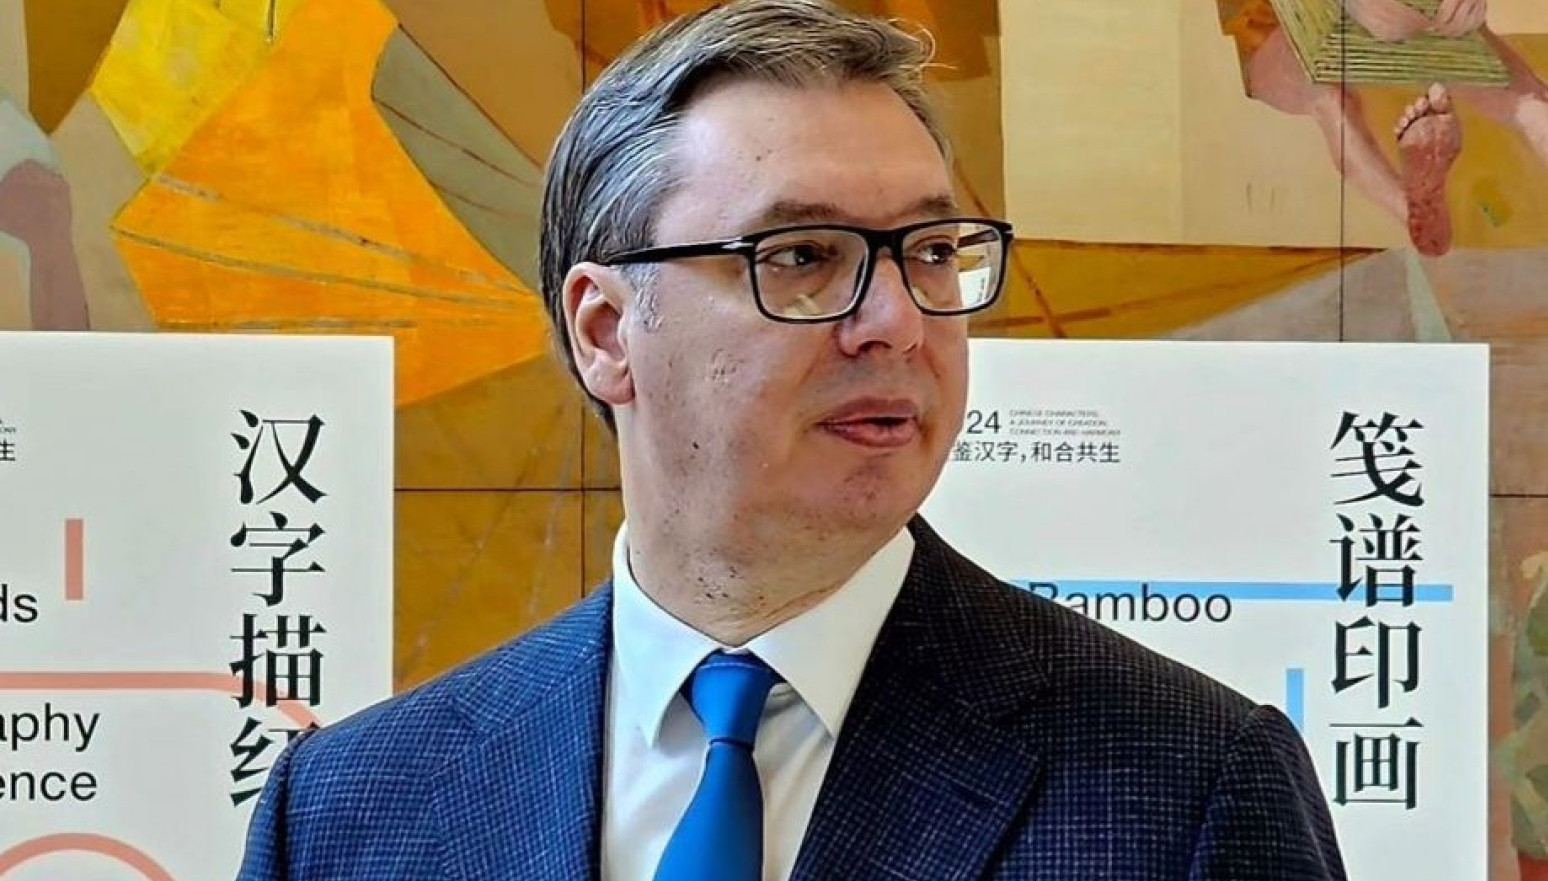 Vučić: They want a collective punishment for the Serbian people. We will fight until the end